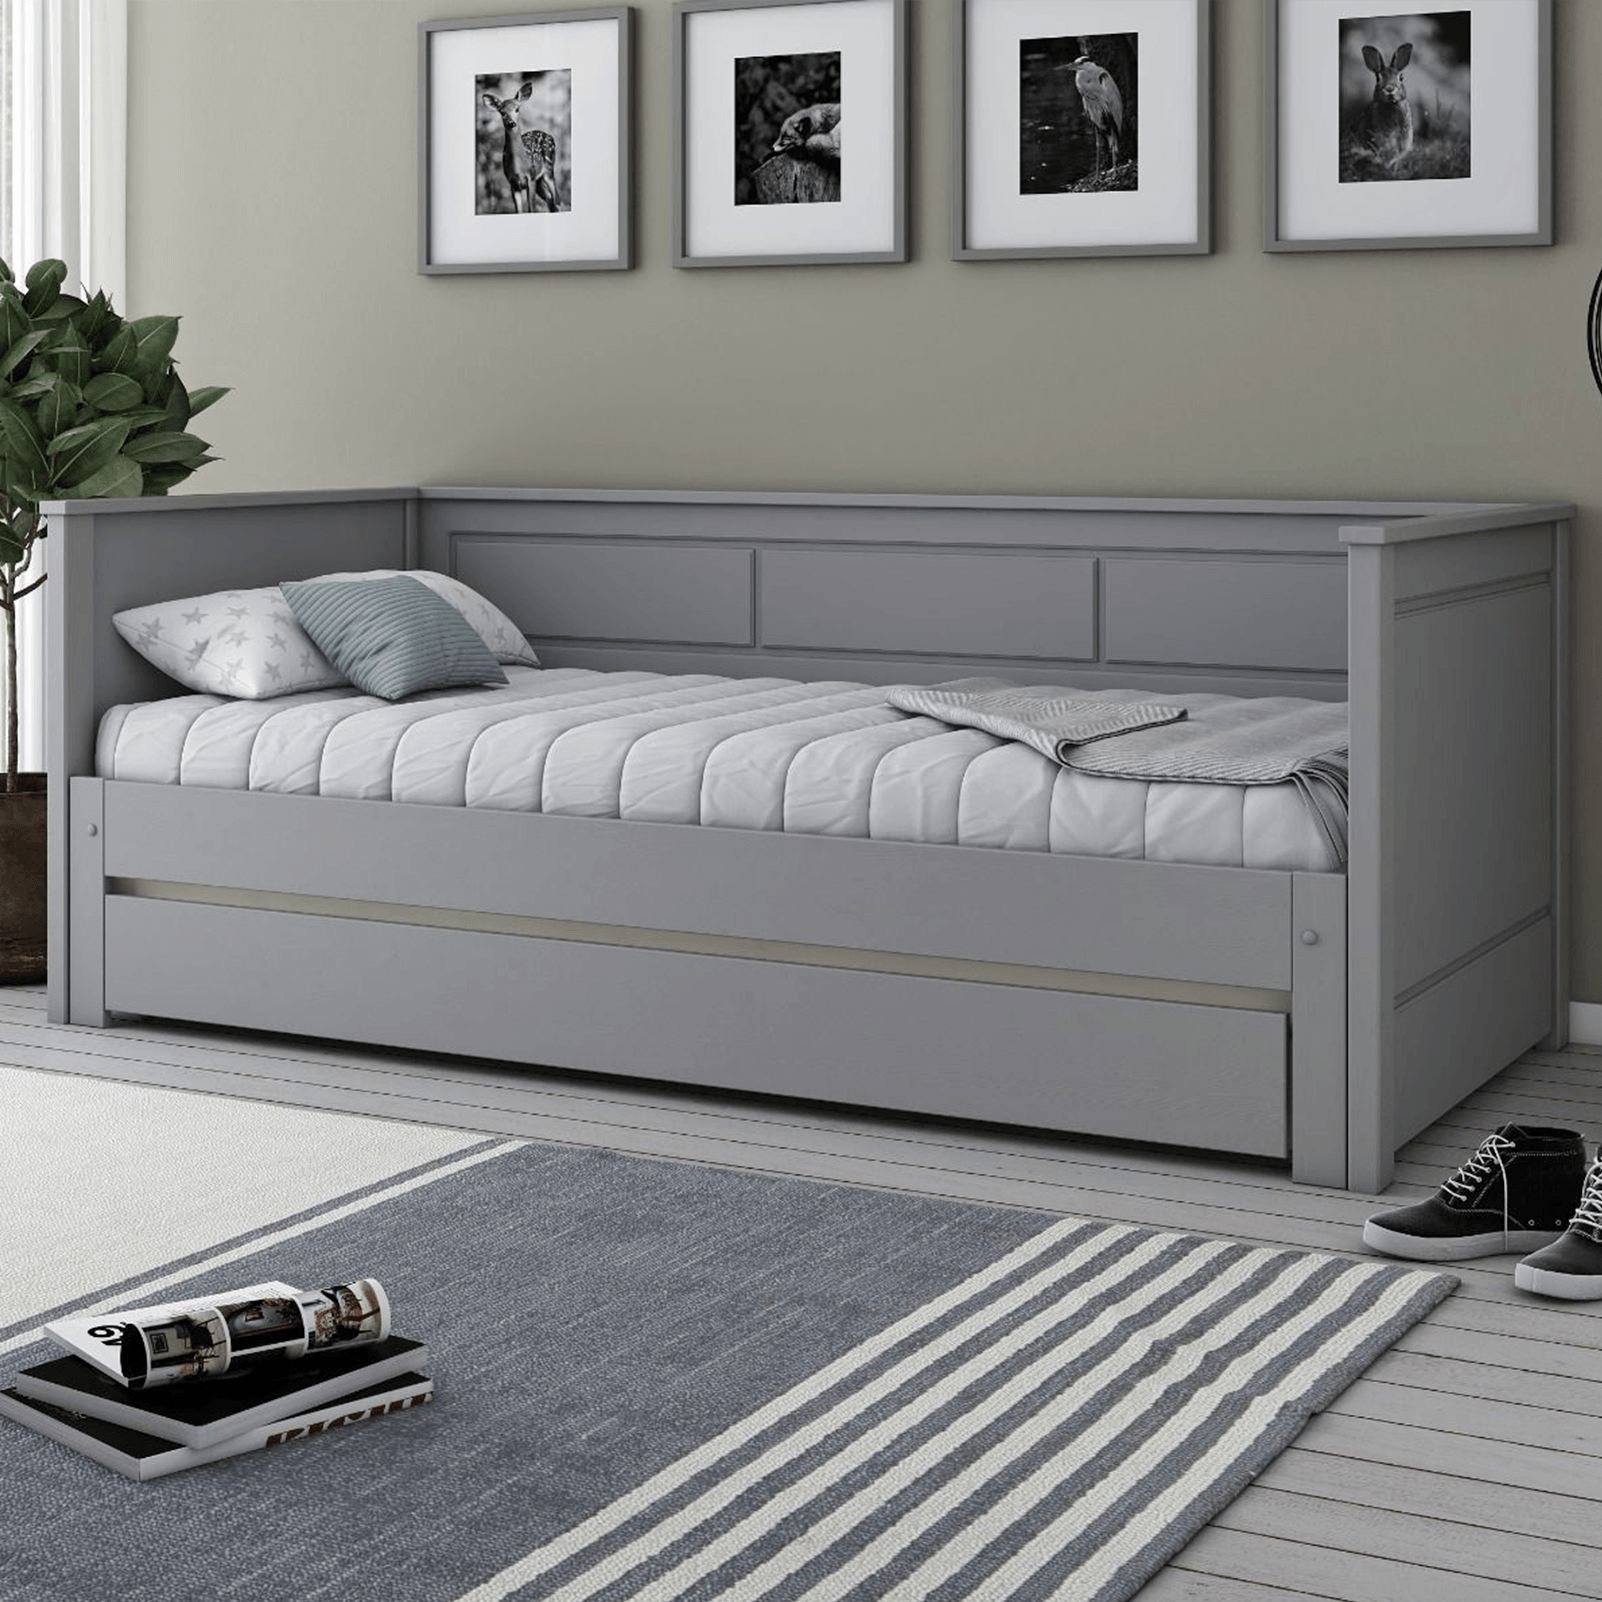 Erika Luxury Guest Bed Grey Solid Wood with Mattress Bundle